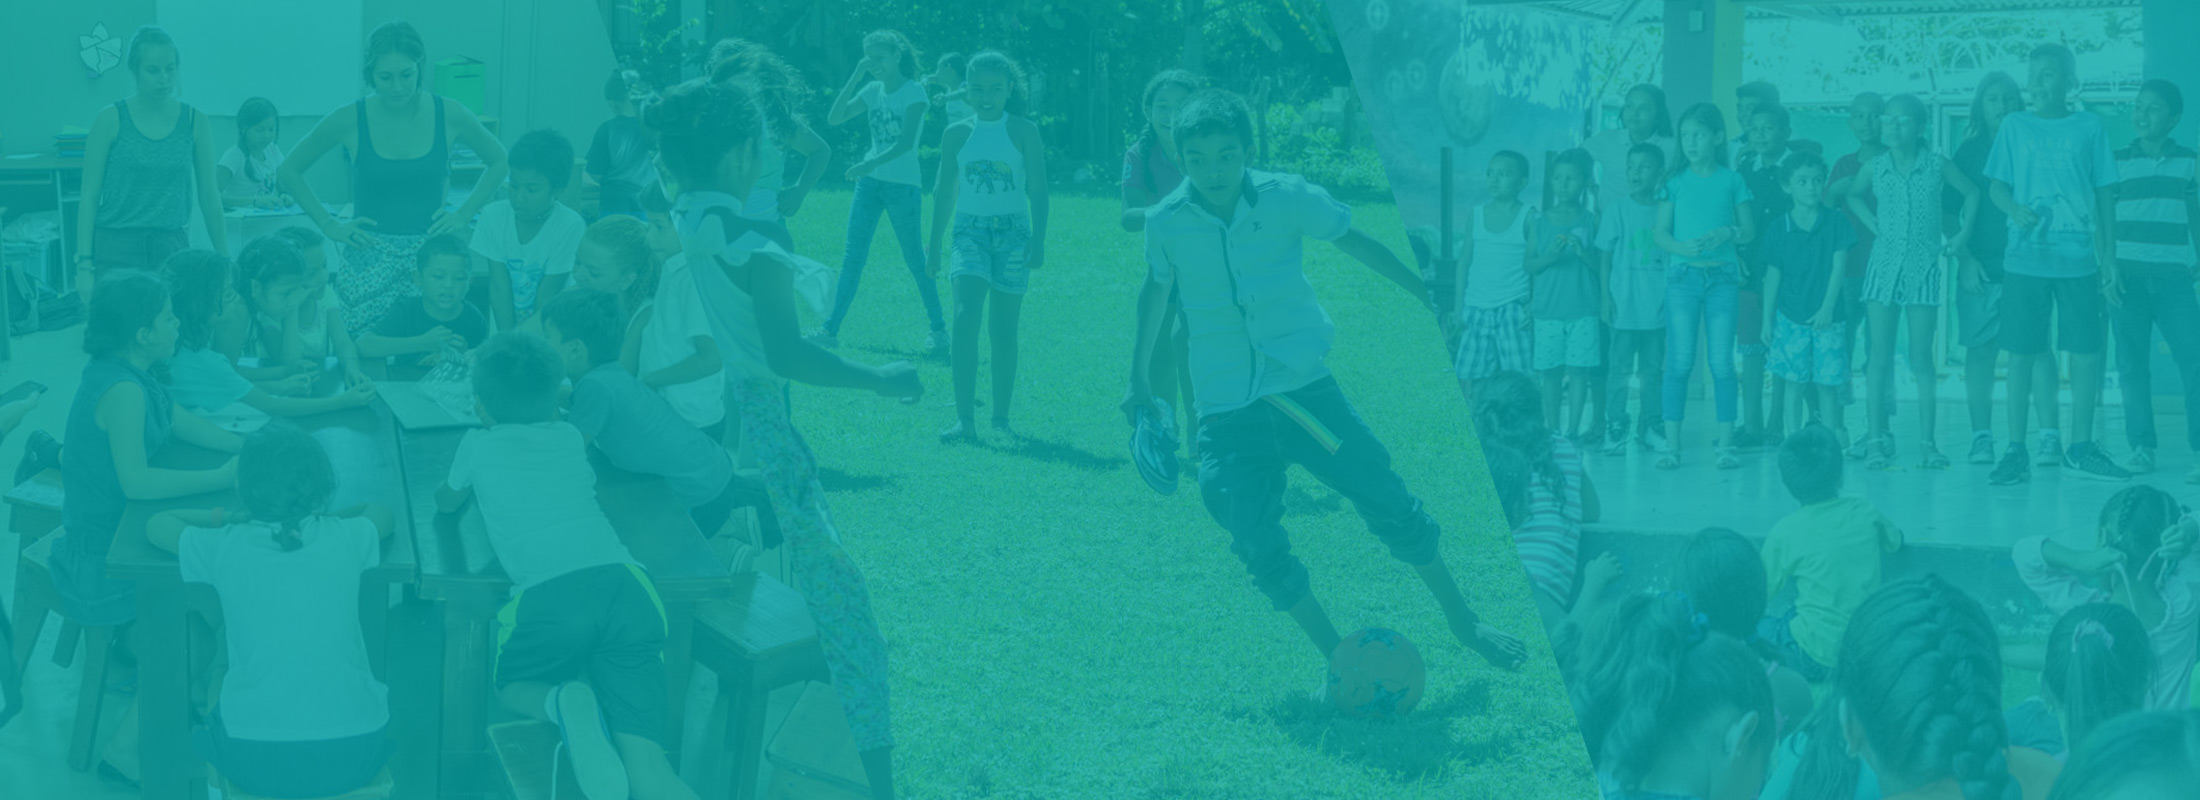 background image of 3 combined photos showing children being taught in school and playing soccer